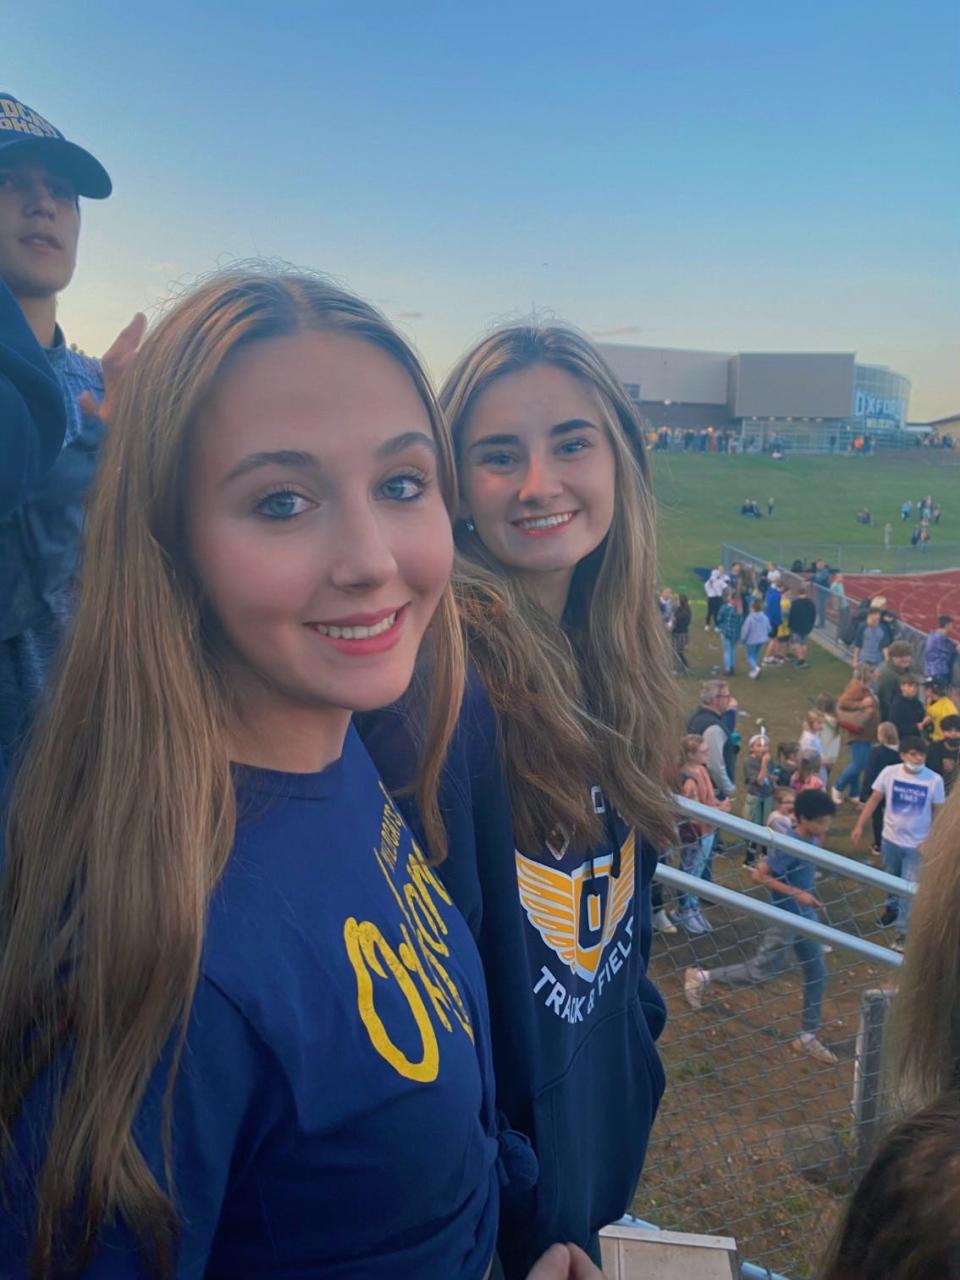 Madeline Johnson, left, pictured with Madisyn Baldwin at an Oxford High School football game. Baldwin was killed during a November school shooting. Johnson is organizing with March For Our Lives and No Future Without Today against gun violence.